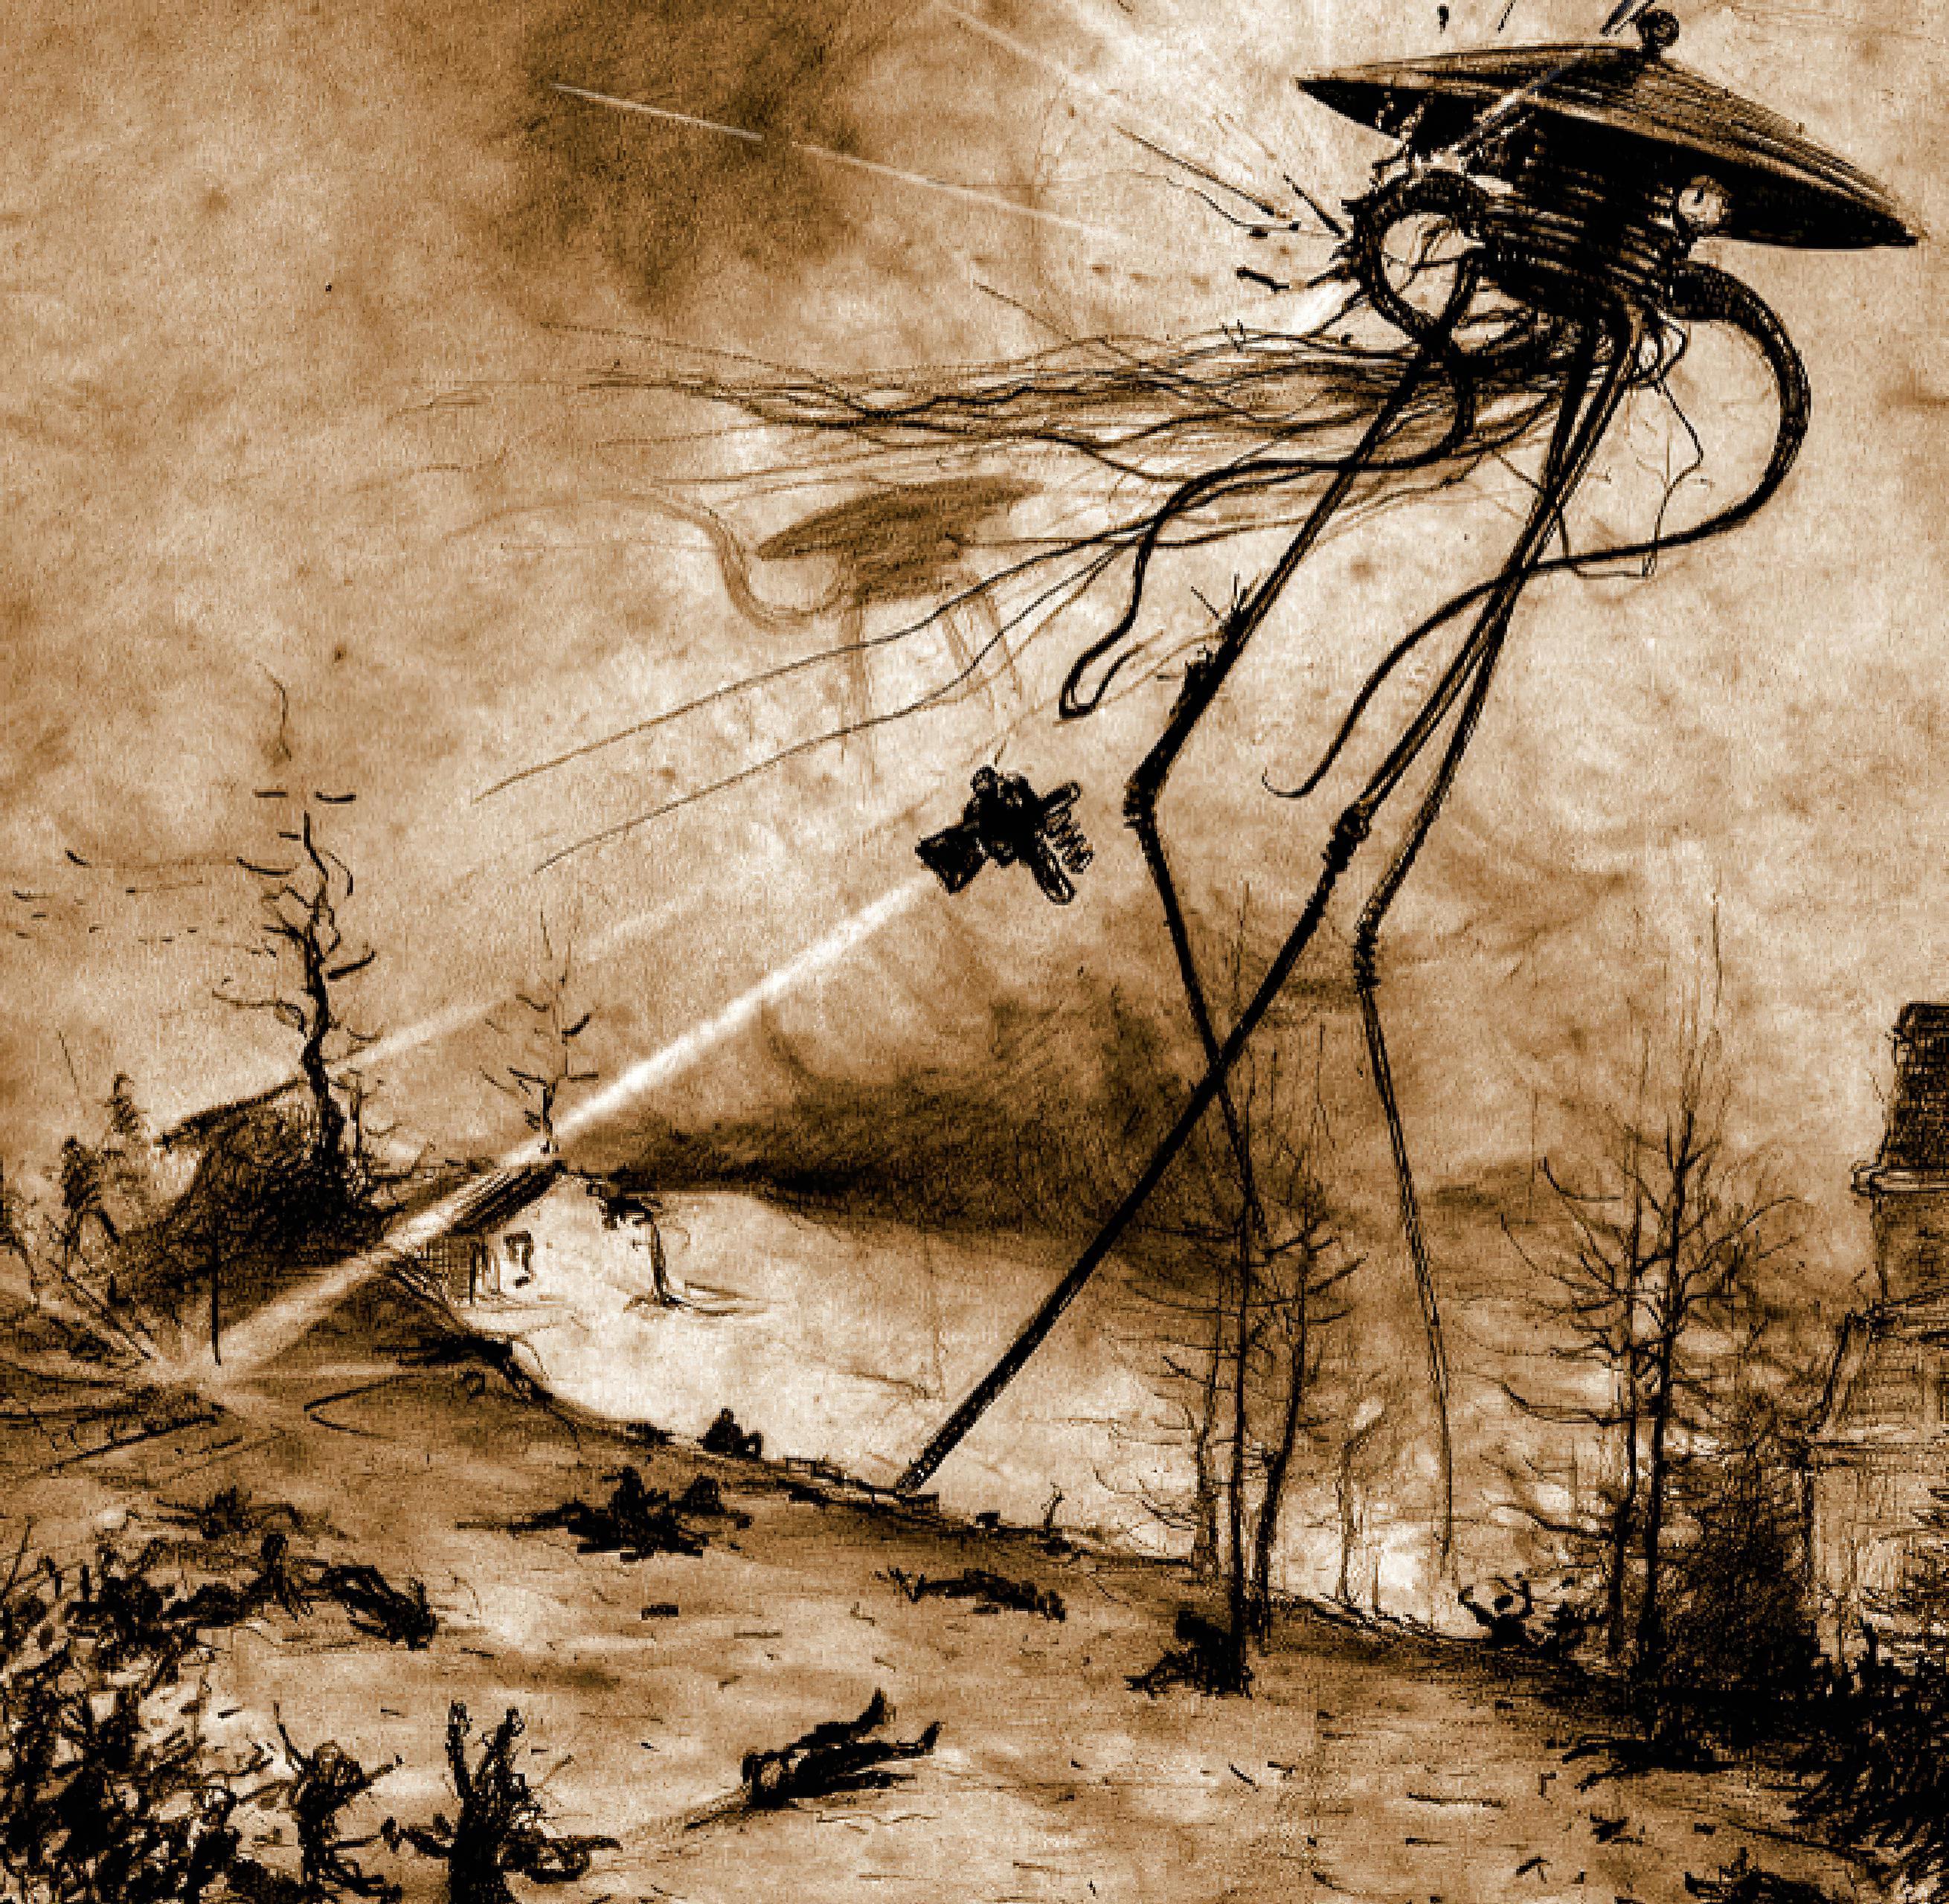 Il libro The War of the Worlds in russo